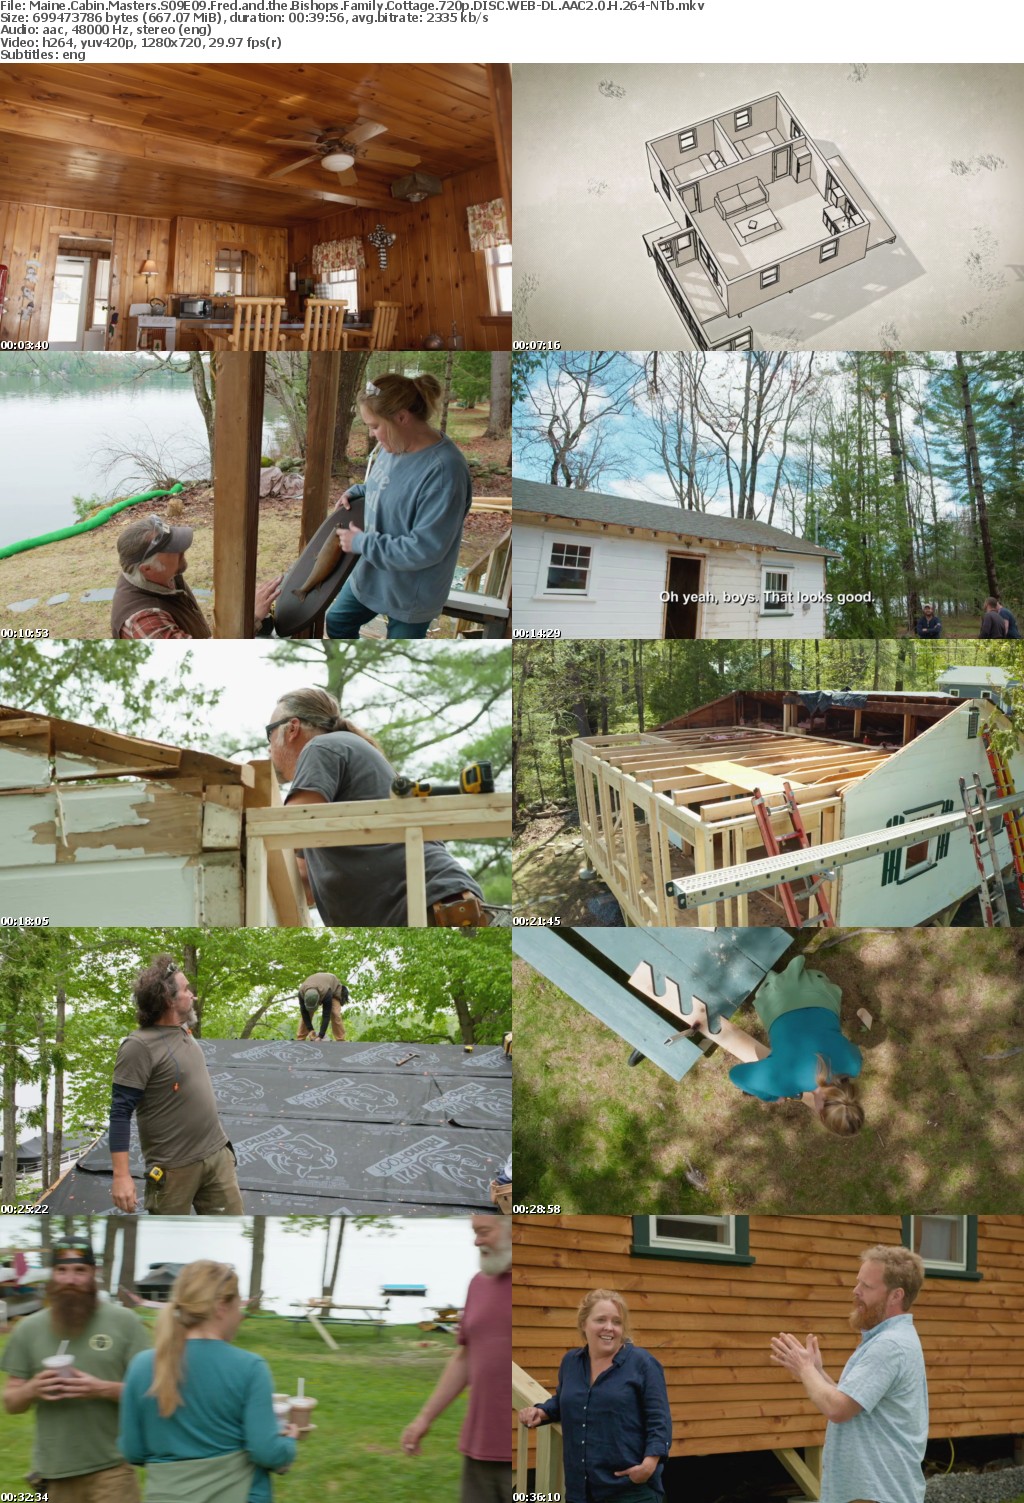 Maine Cabin Masters S09E09 Fred and the Bishops Family Cottage 720p DISC WEB-DL AAC2 0 H 264-NTb